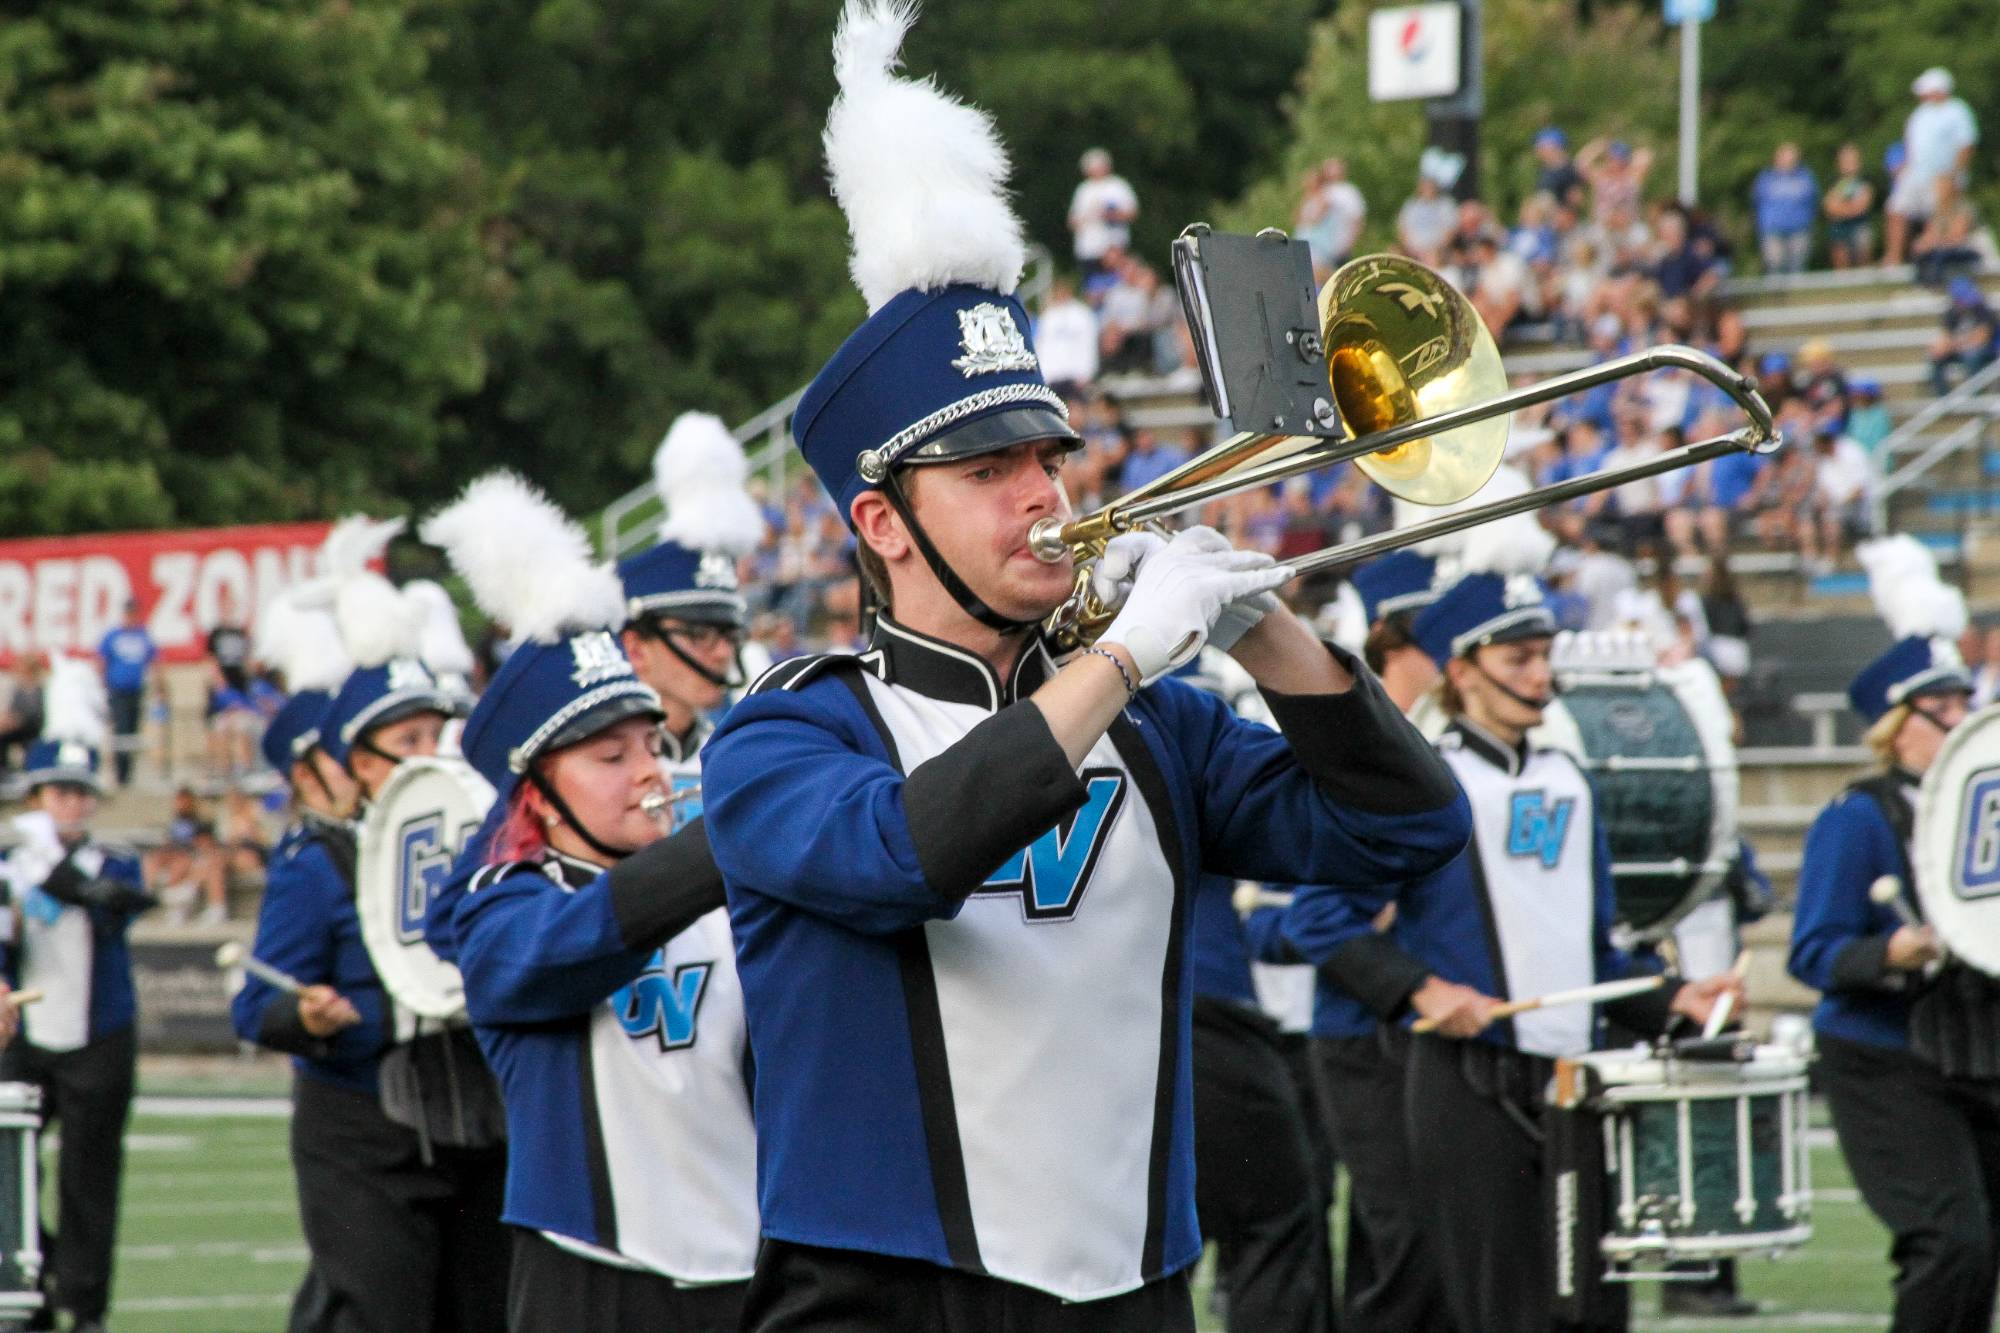 LMB member playing their trombone while in uniform at a football game